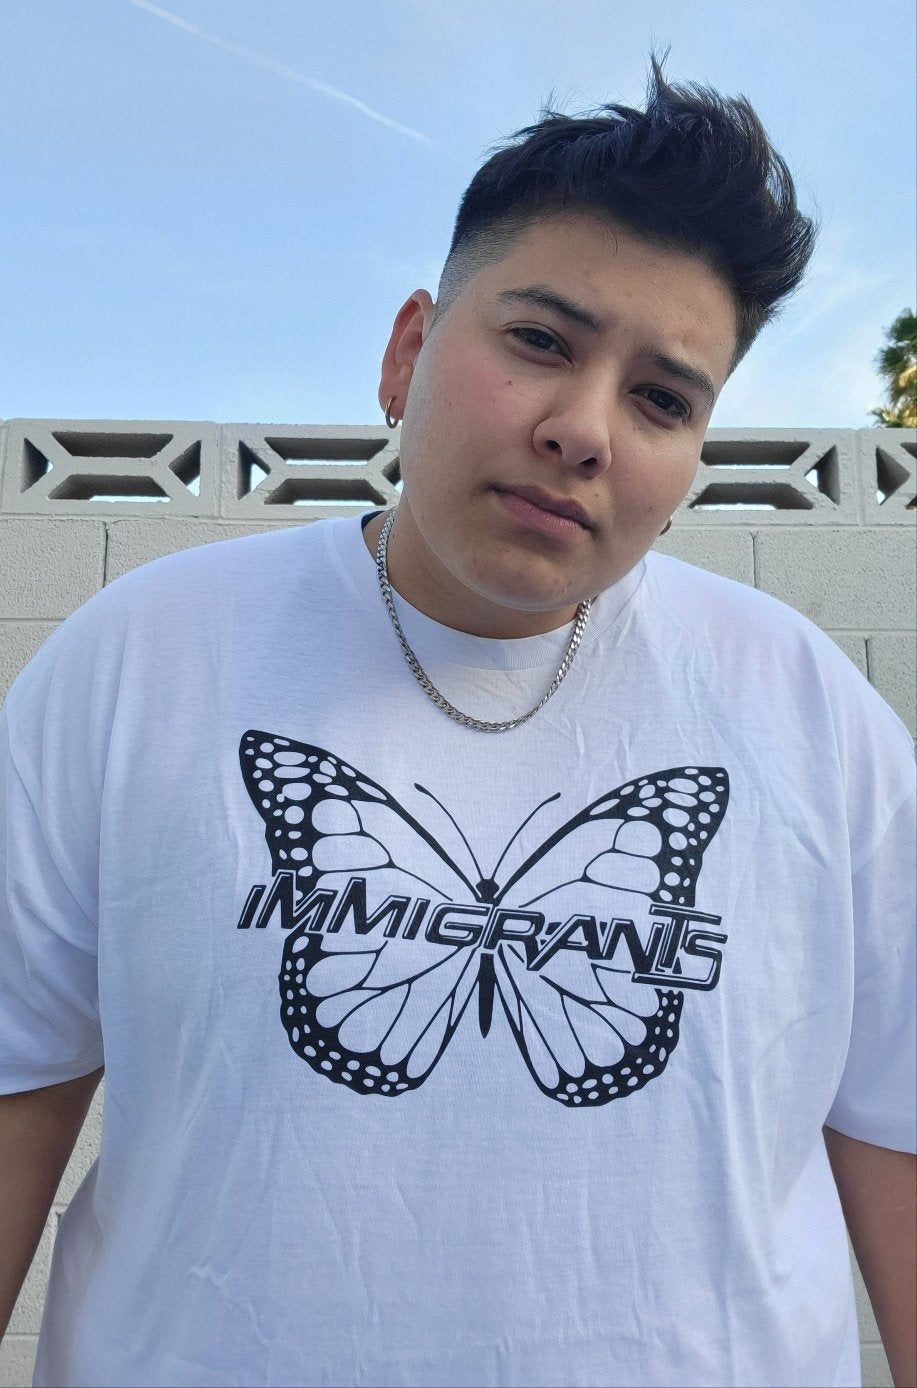 Immigrants Butterfly shirt